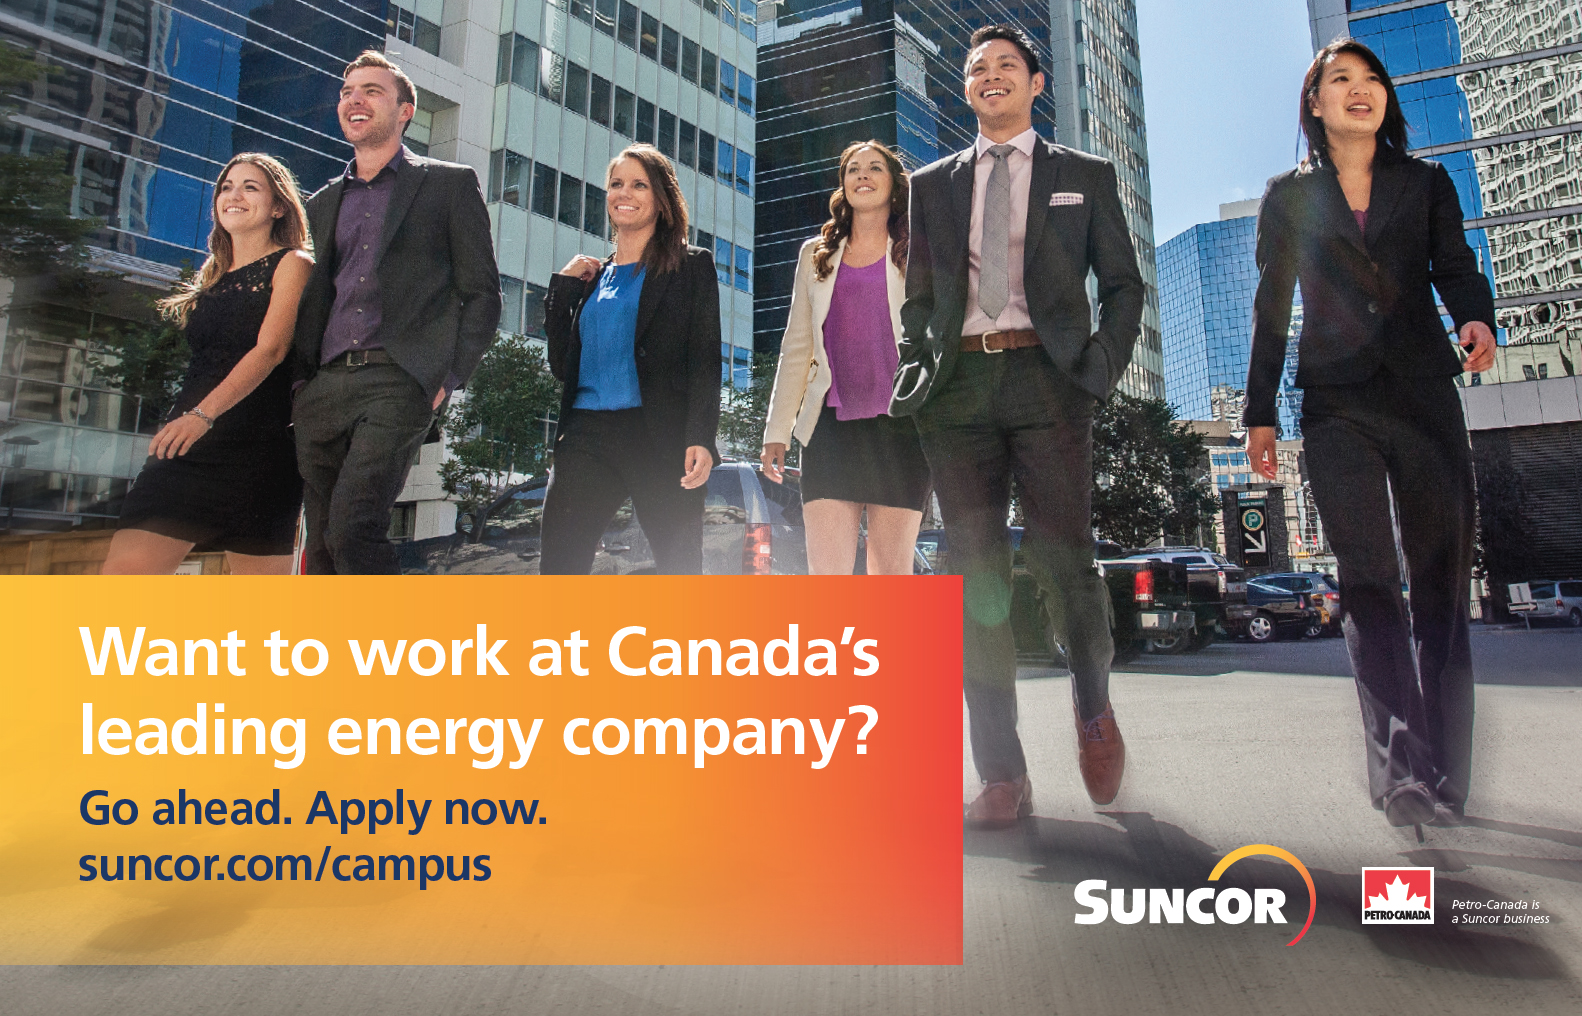 Part of the marketing & communications team for this Suncor recruitment campaign